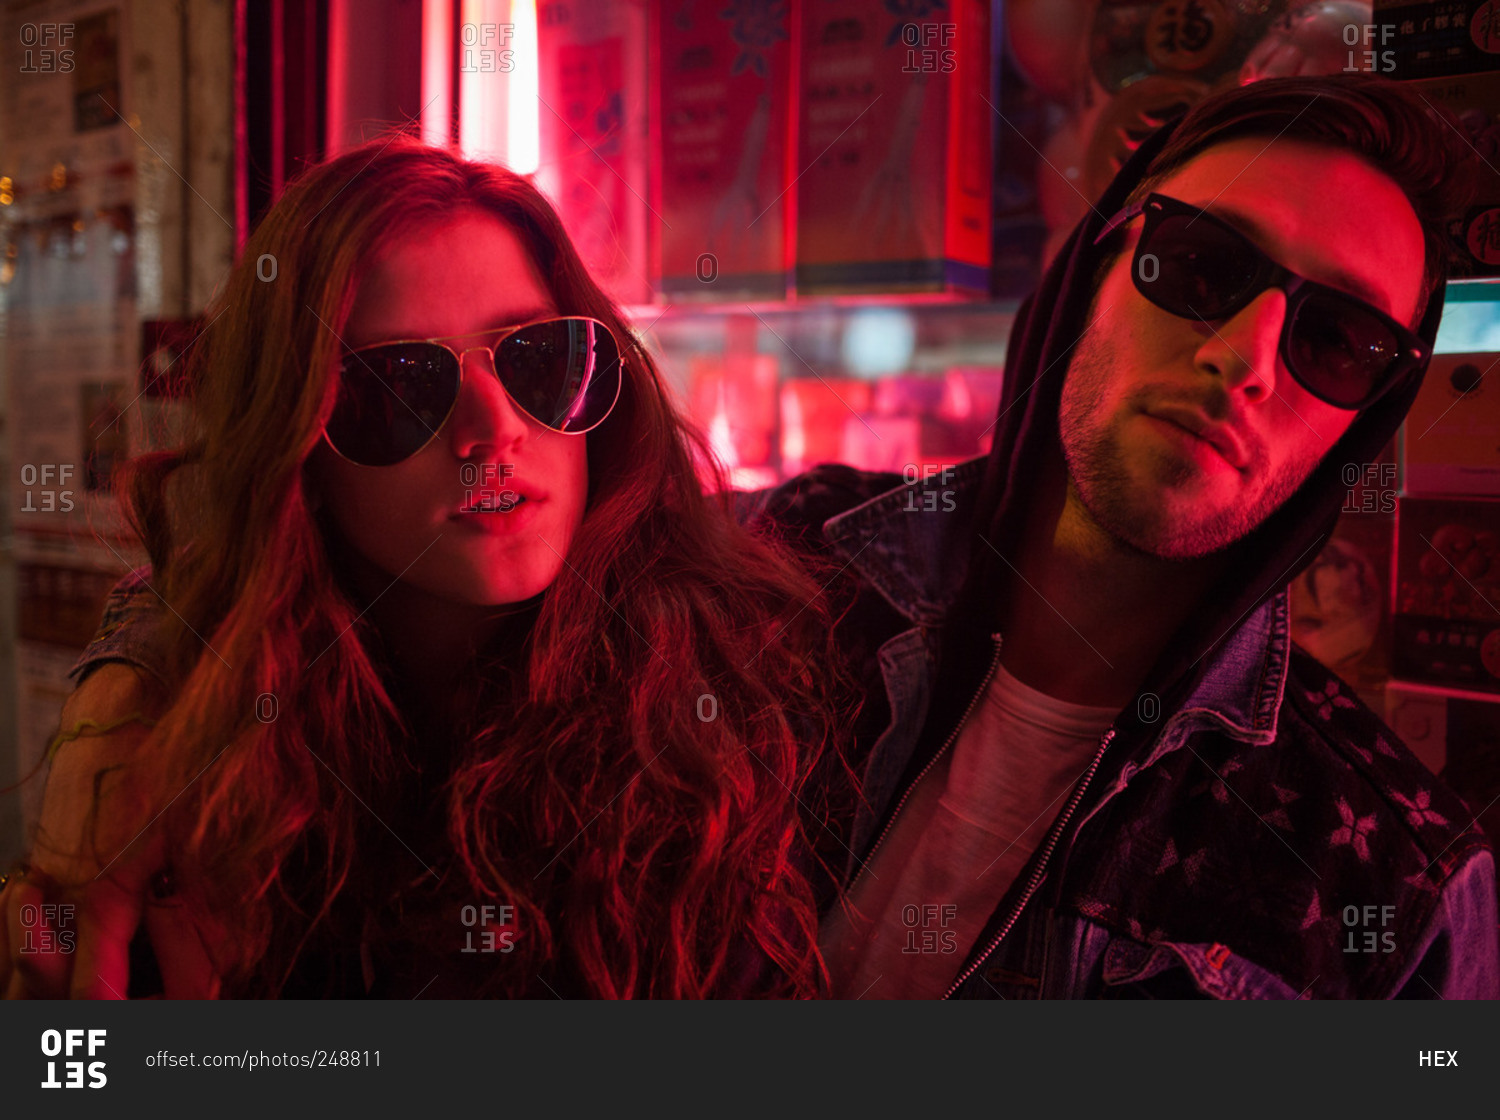 Hip young couple lit by neon lights wearing sunglasses at night